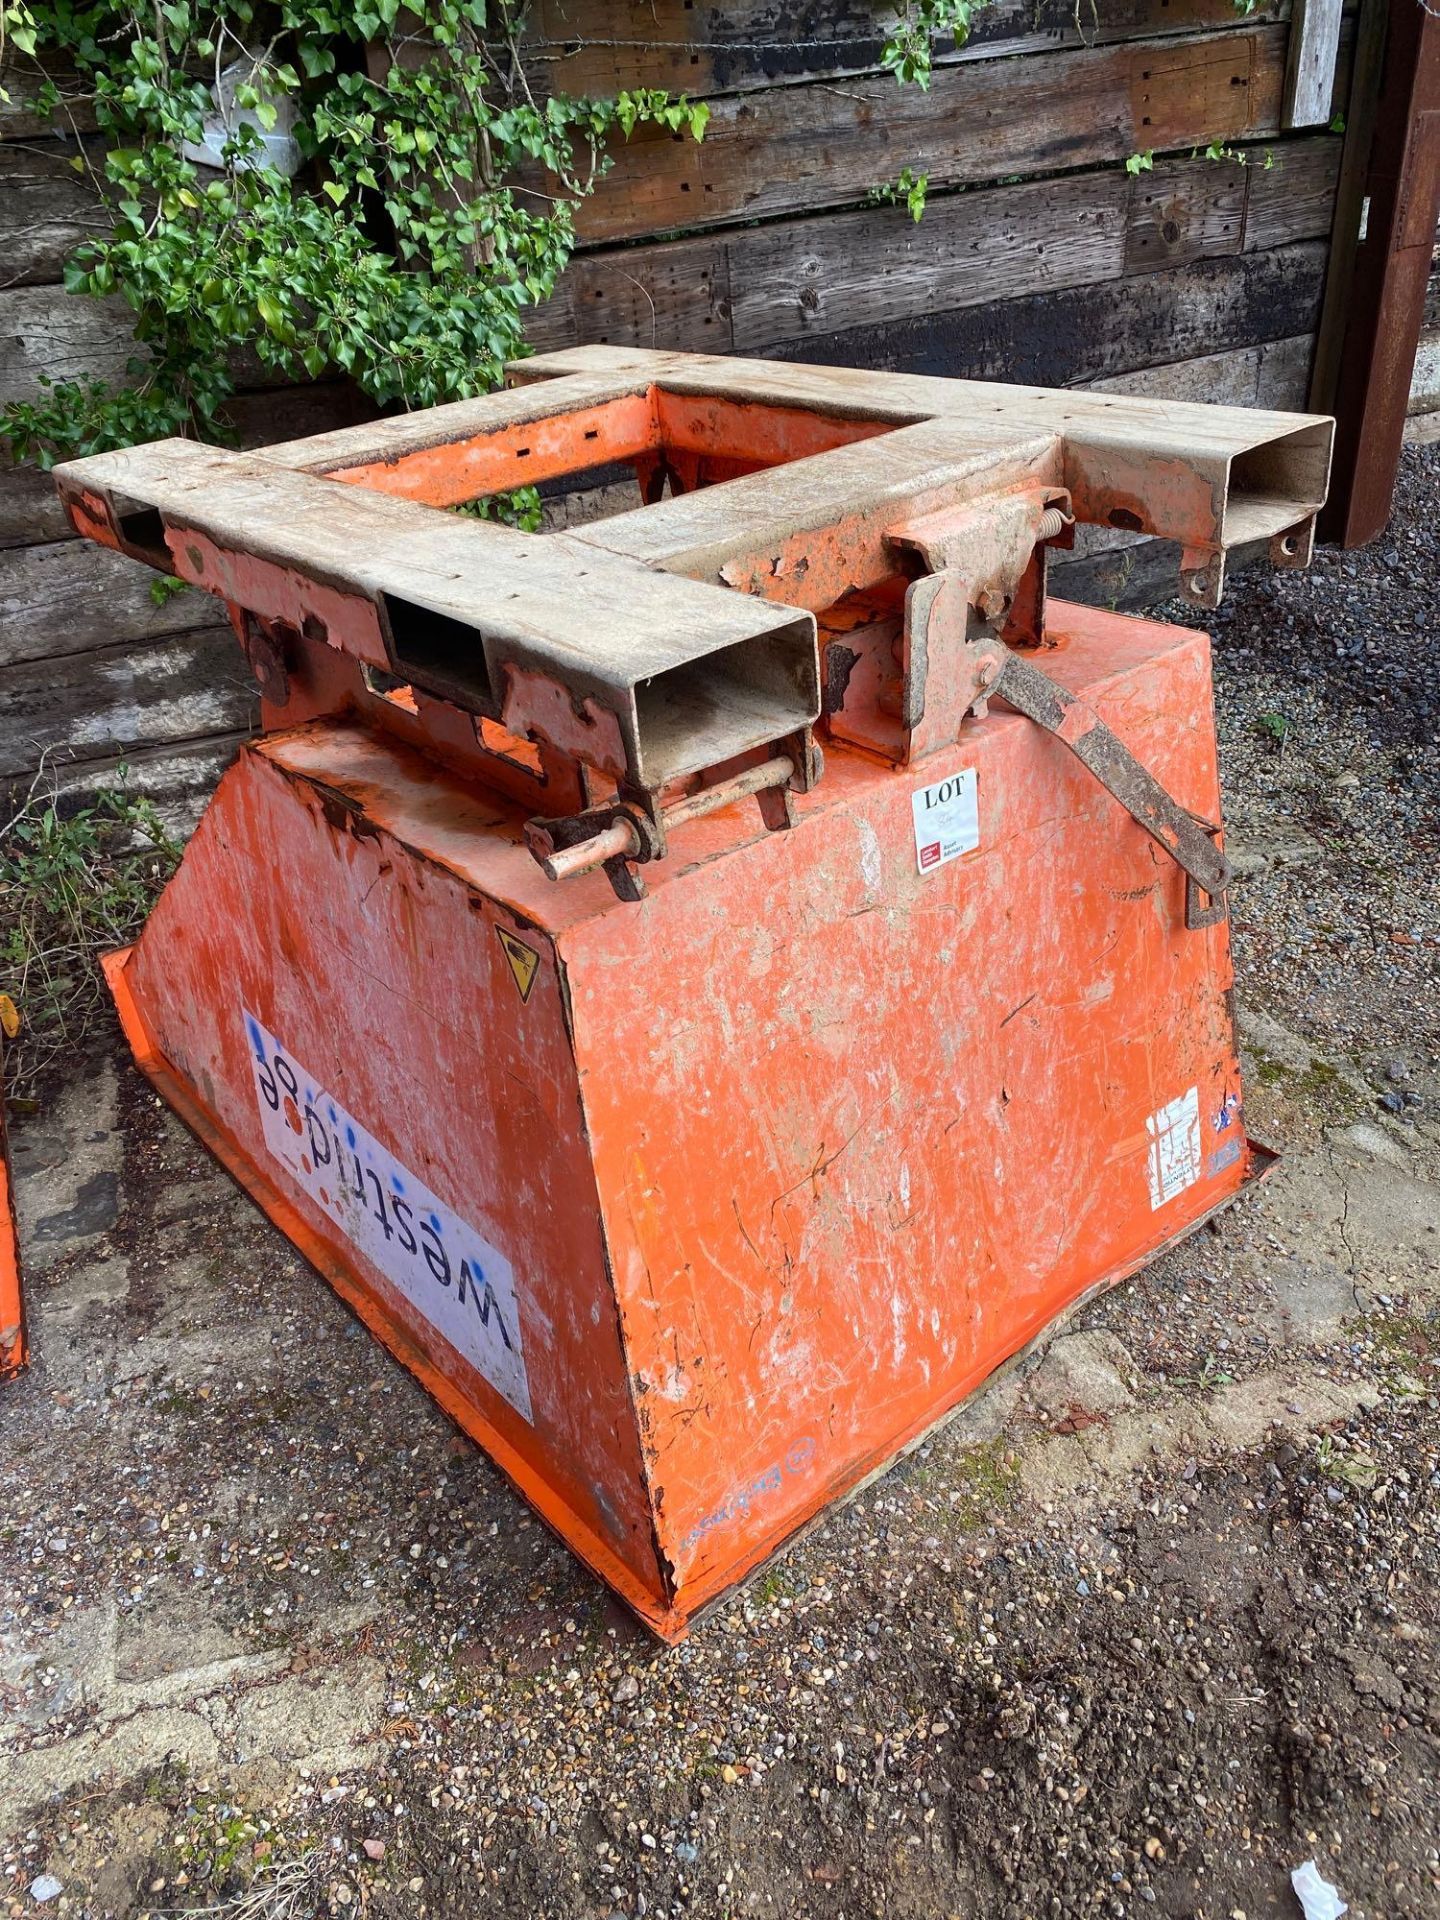 Tipping Skip1200 Ltrs 1500 kg with lifting eyes